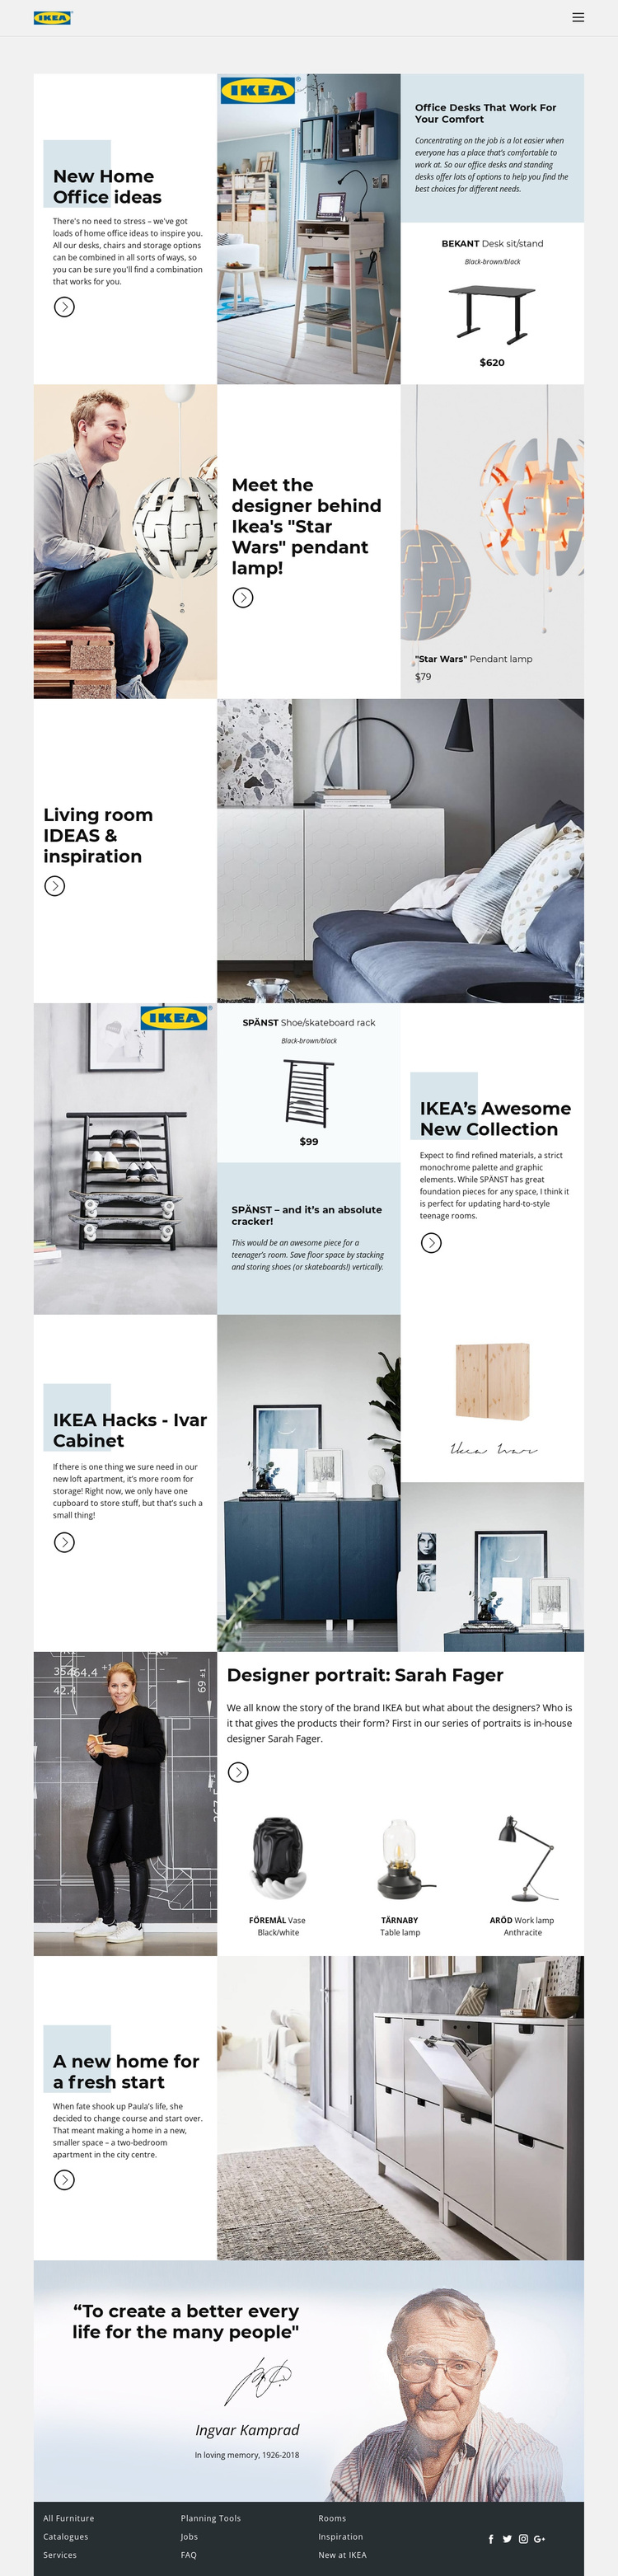 Inspiration from IKEA Joomla Page Builder